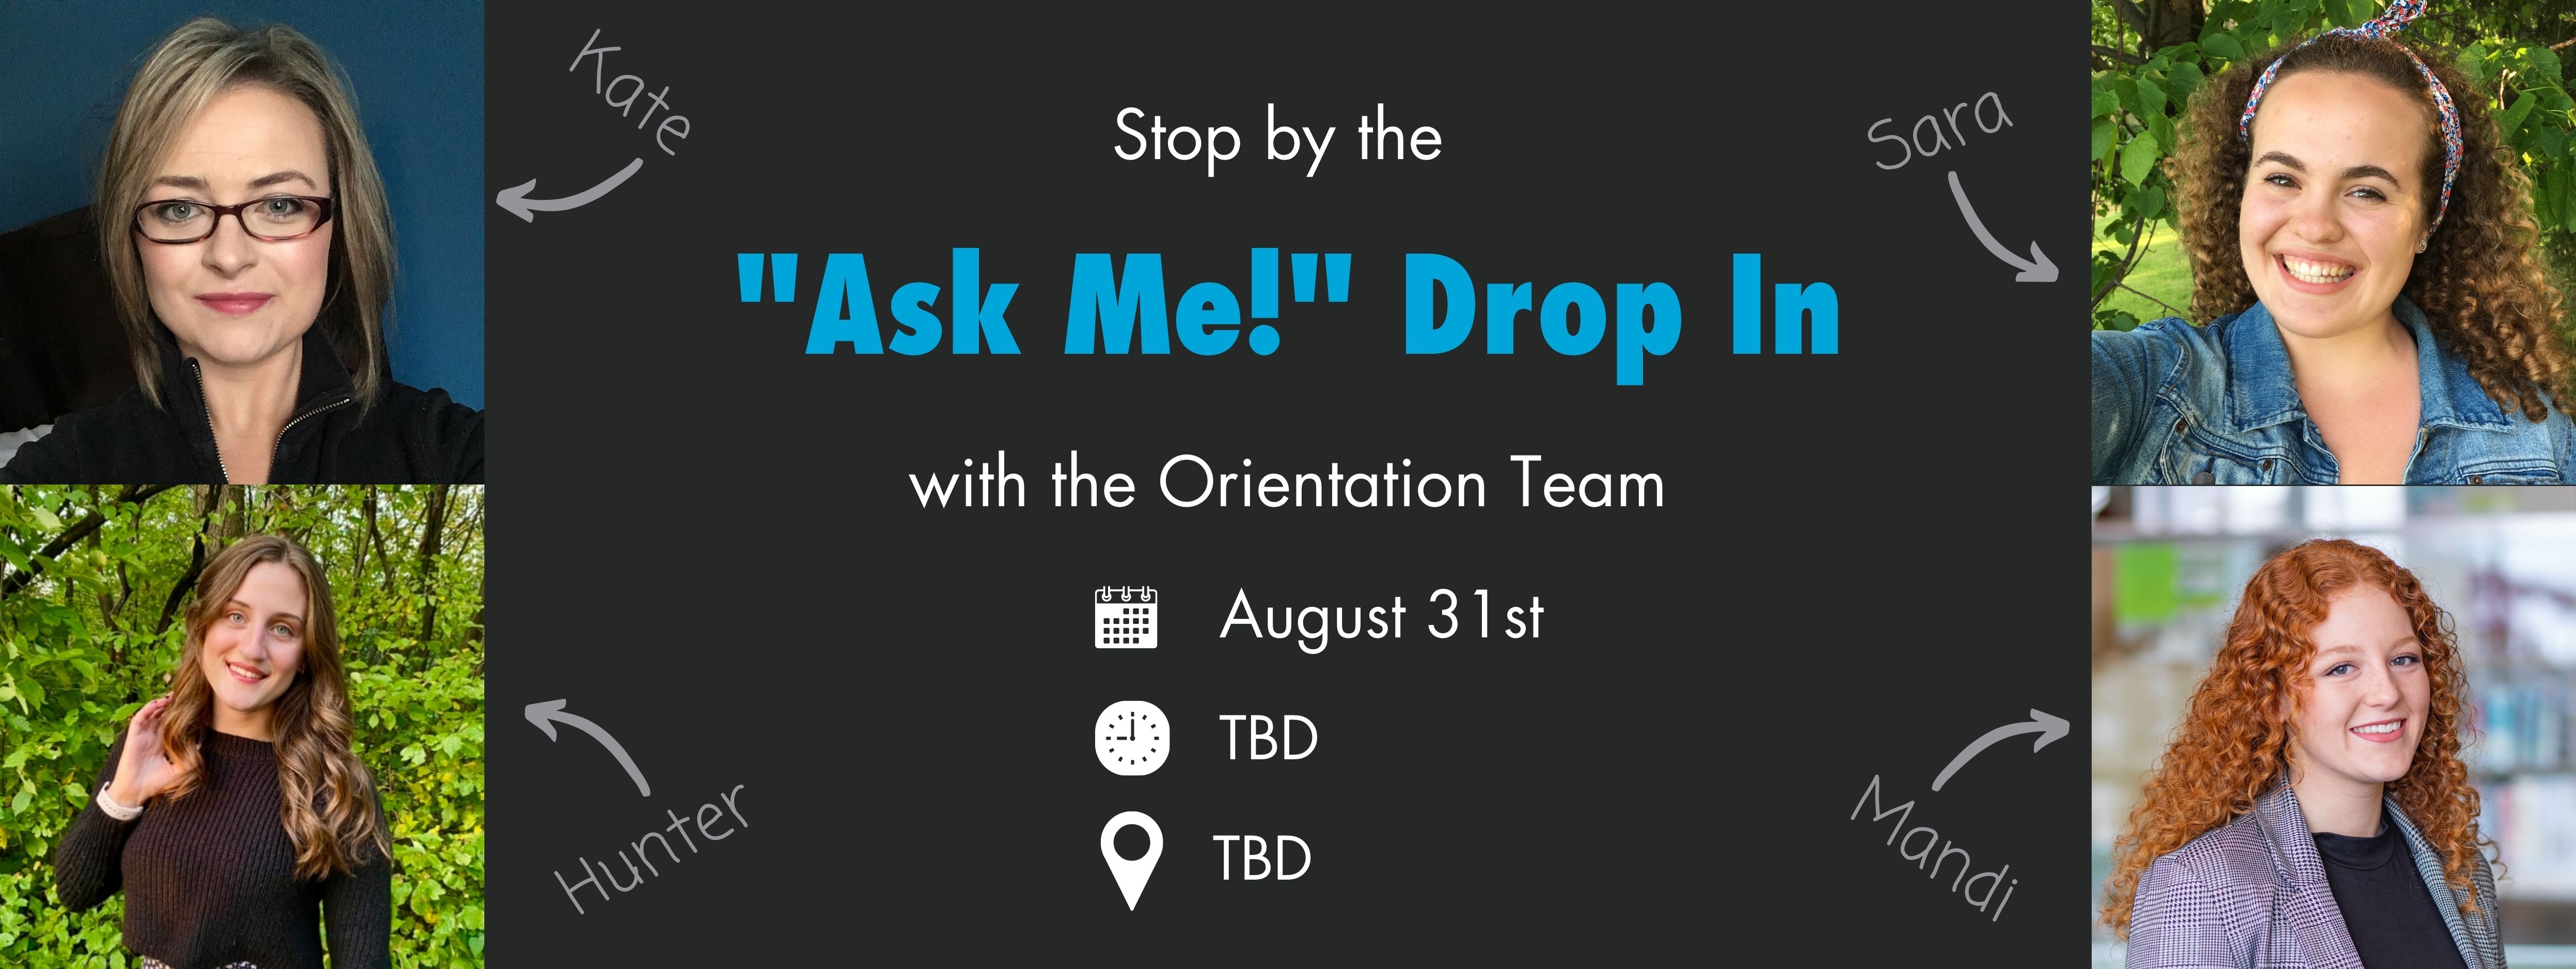 AskMe Orientation Team banner; drop in Aug 31; team pictures